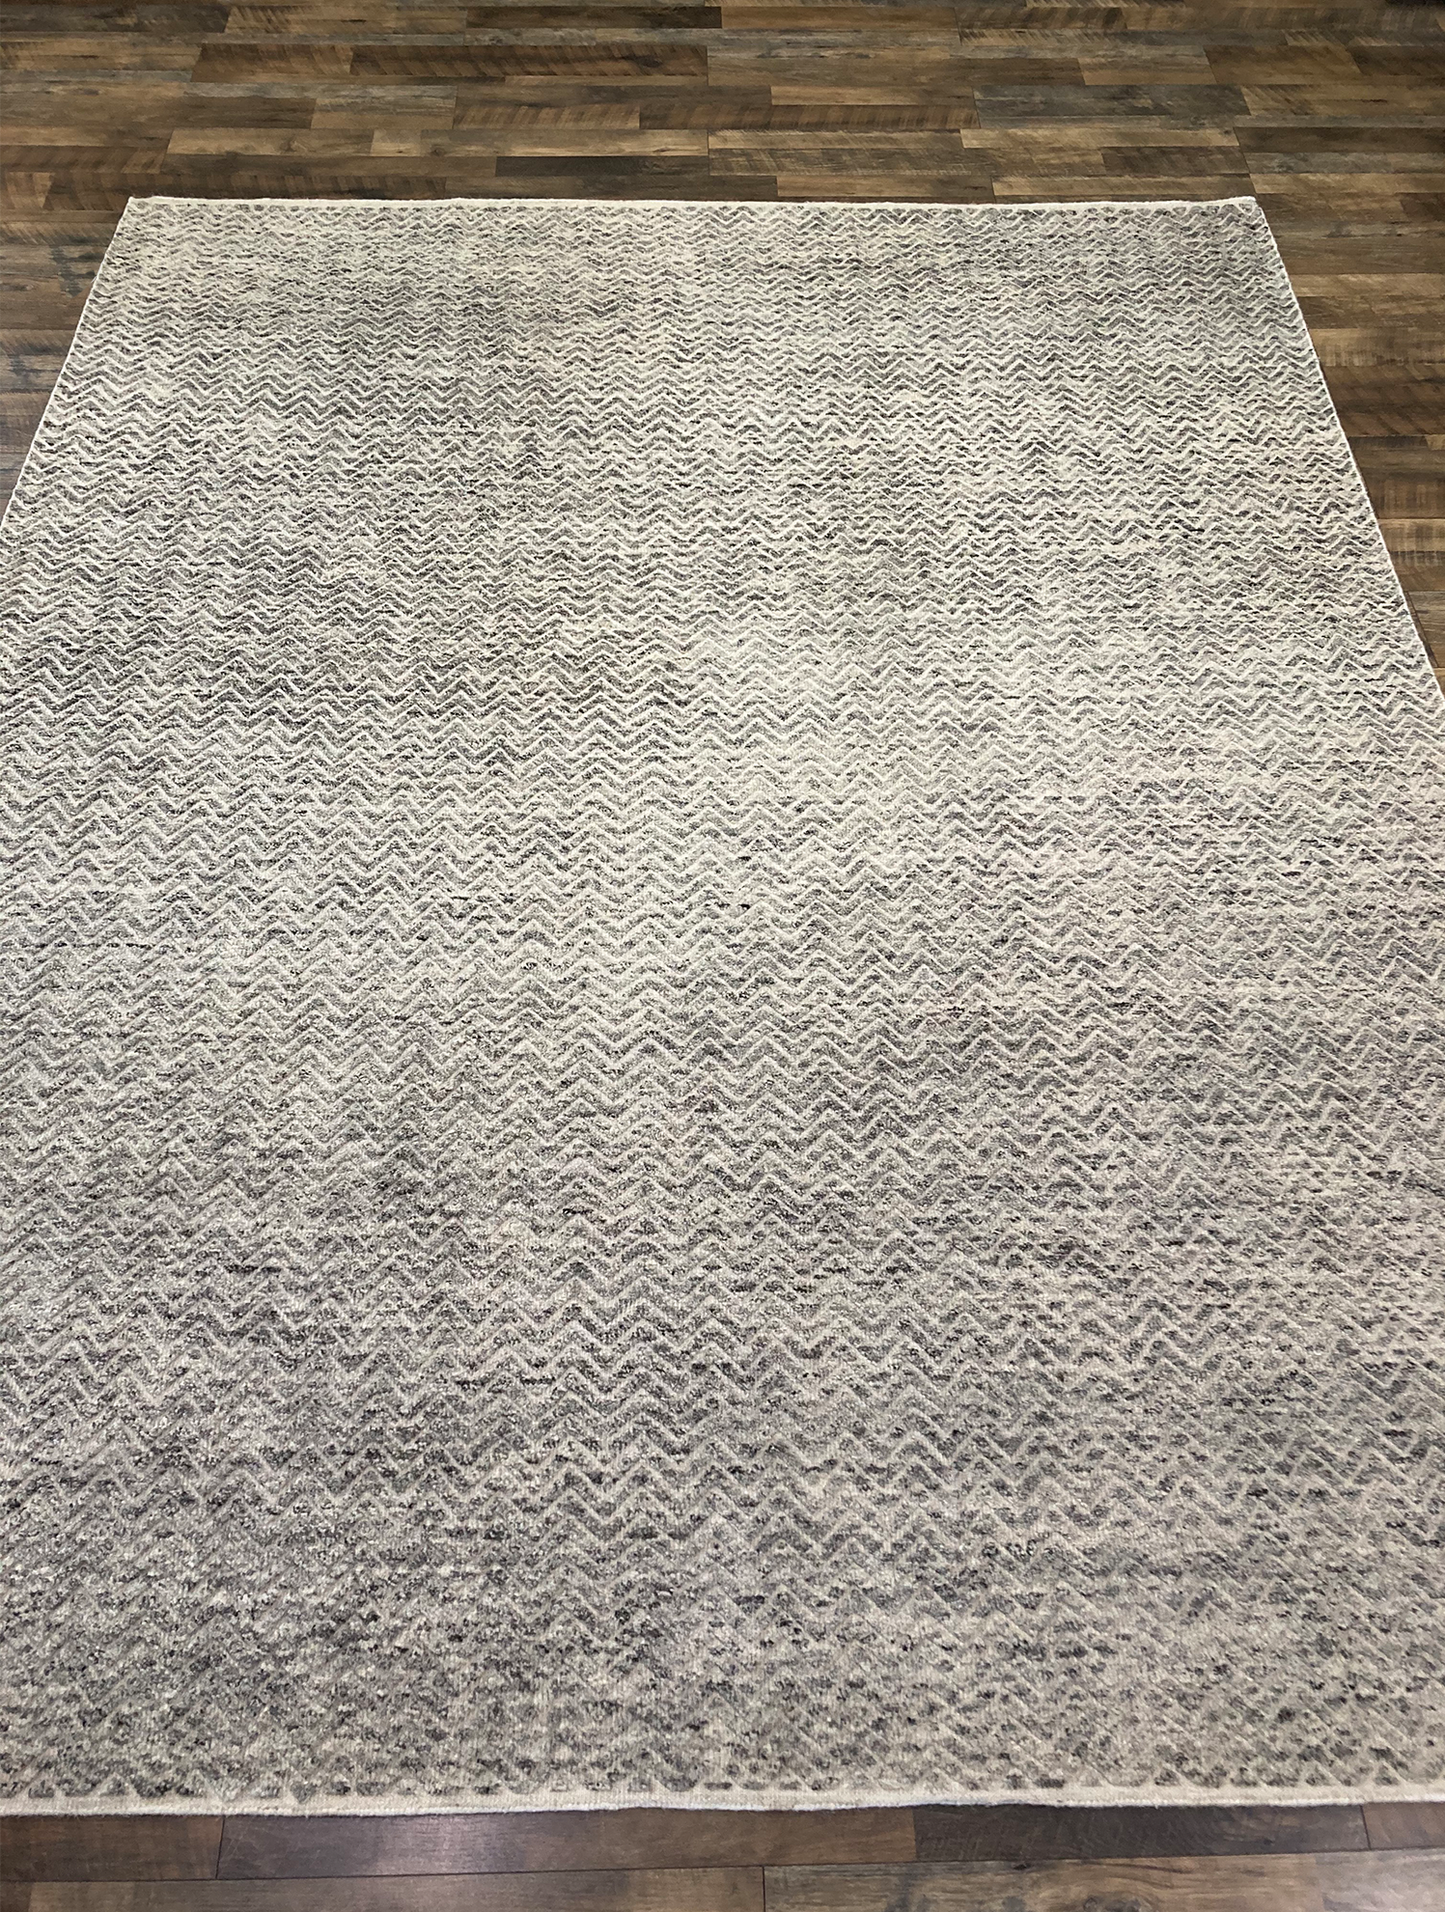 refined carpet rugs high low area rug textured chevron herringbone pattern gray oatmeal area rug online contemporary transitional affordable area rug store online orange county california fountain valley ca 92708